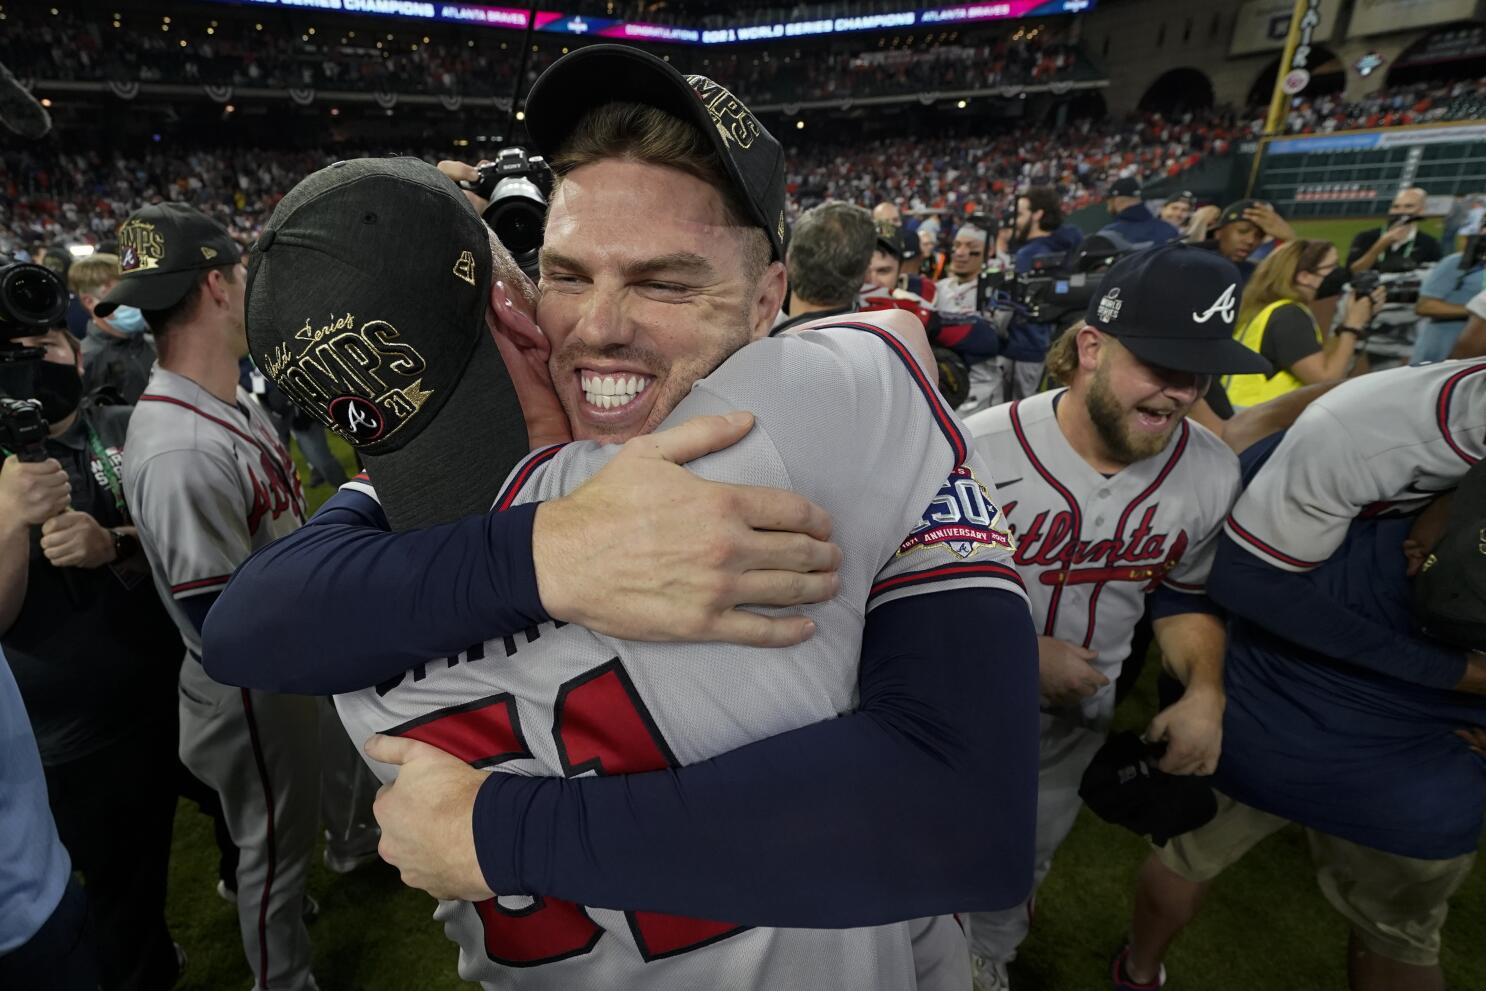 How the Braves grabbed first place